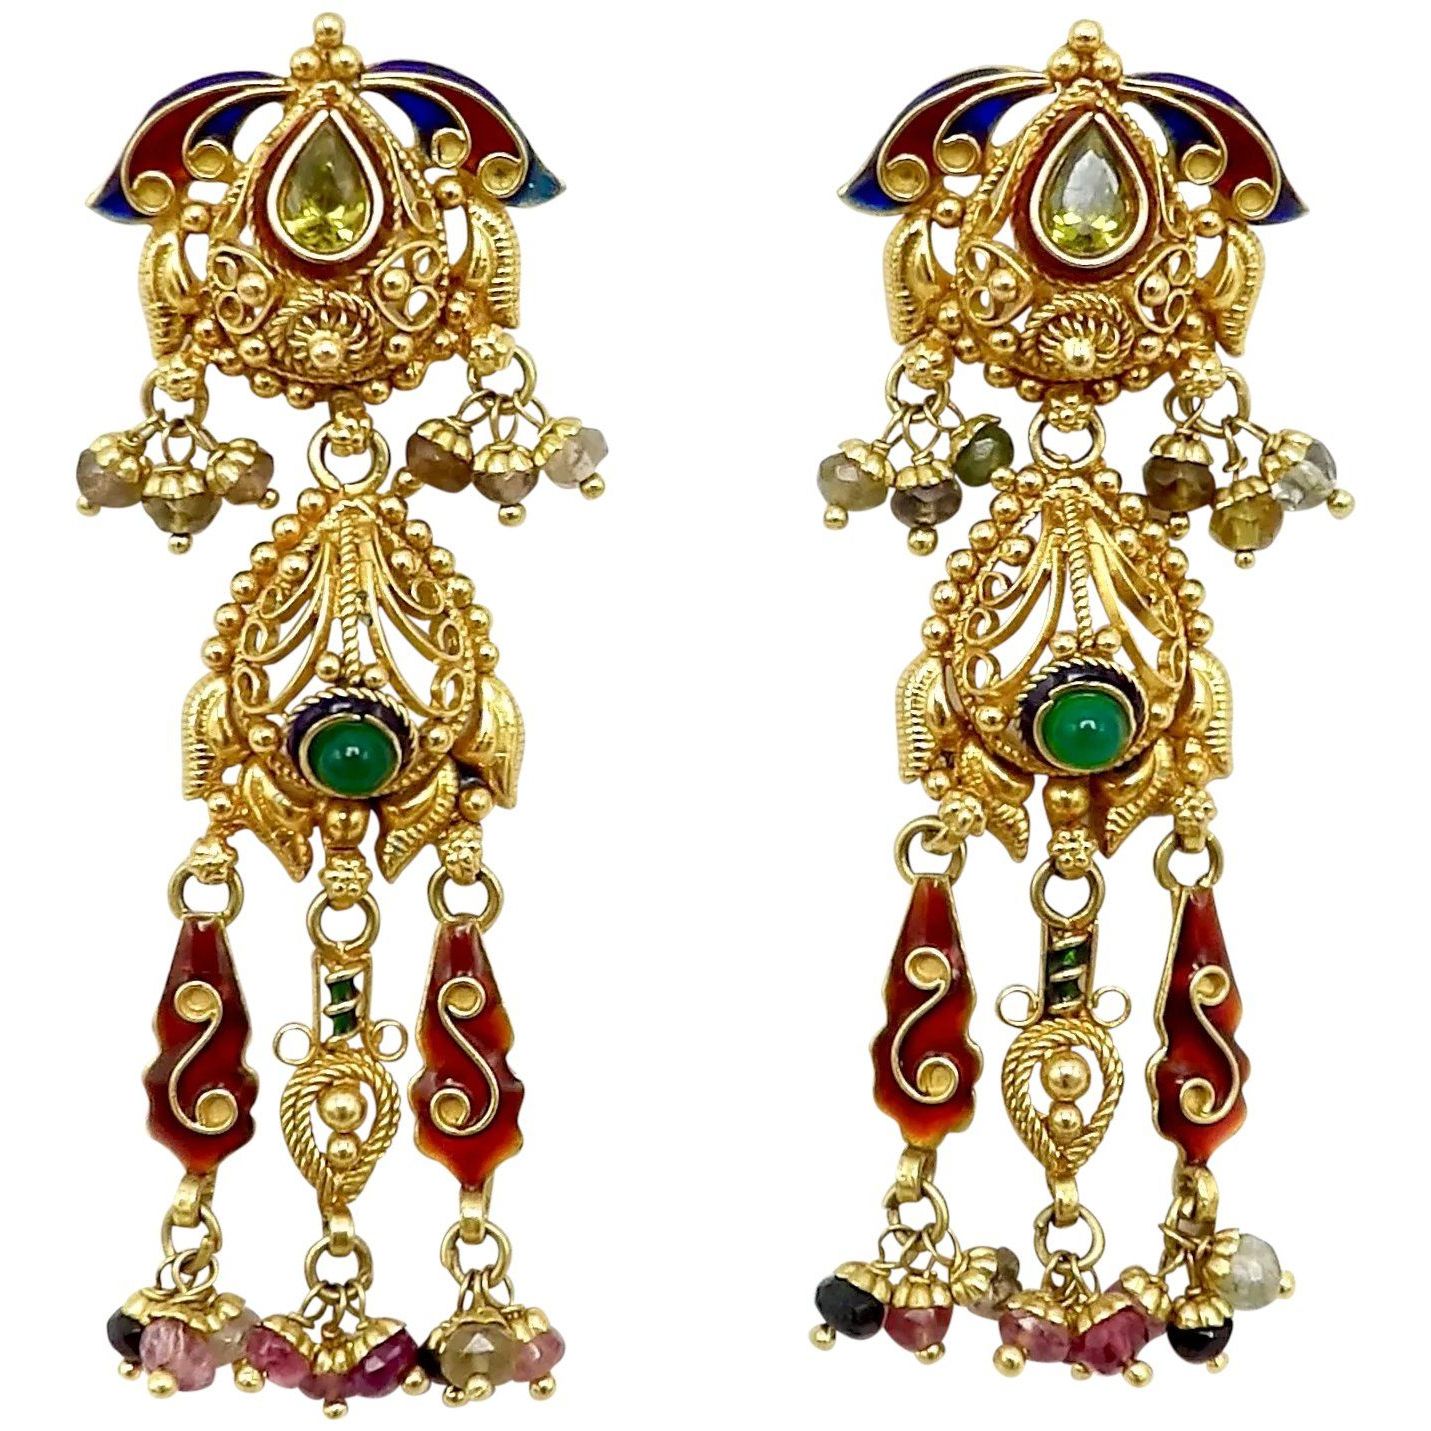 2020 22k Gold Vintage Indian Chandelier Earrings With Peridot For Warm Antique Gold Ring Chandeliers (View 9 of 15)